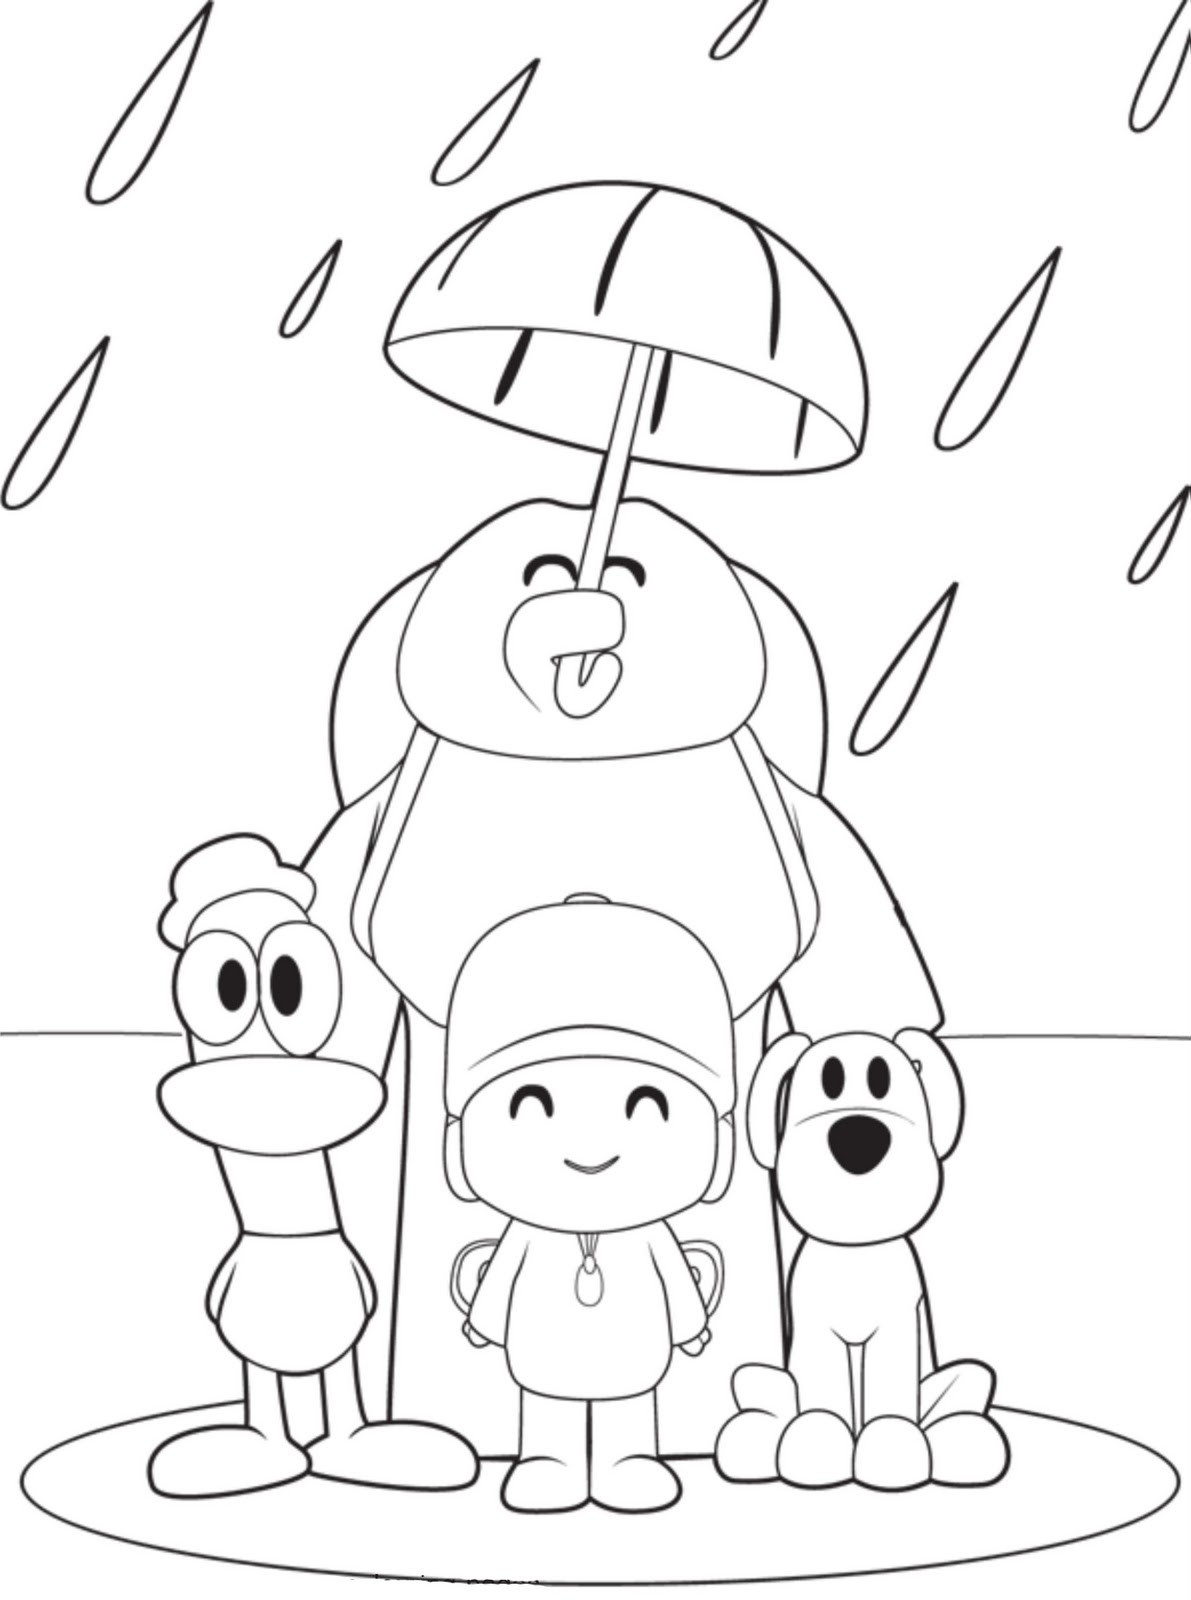 Printable Coloring Pages For Toddlers
 Free Printable Pocoyo Coloring Pages For Kids